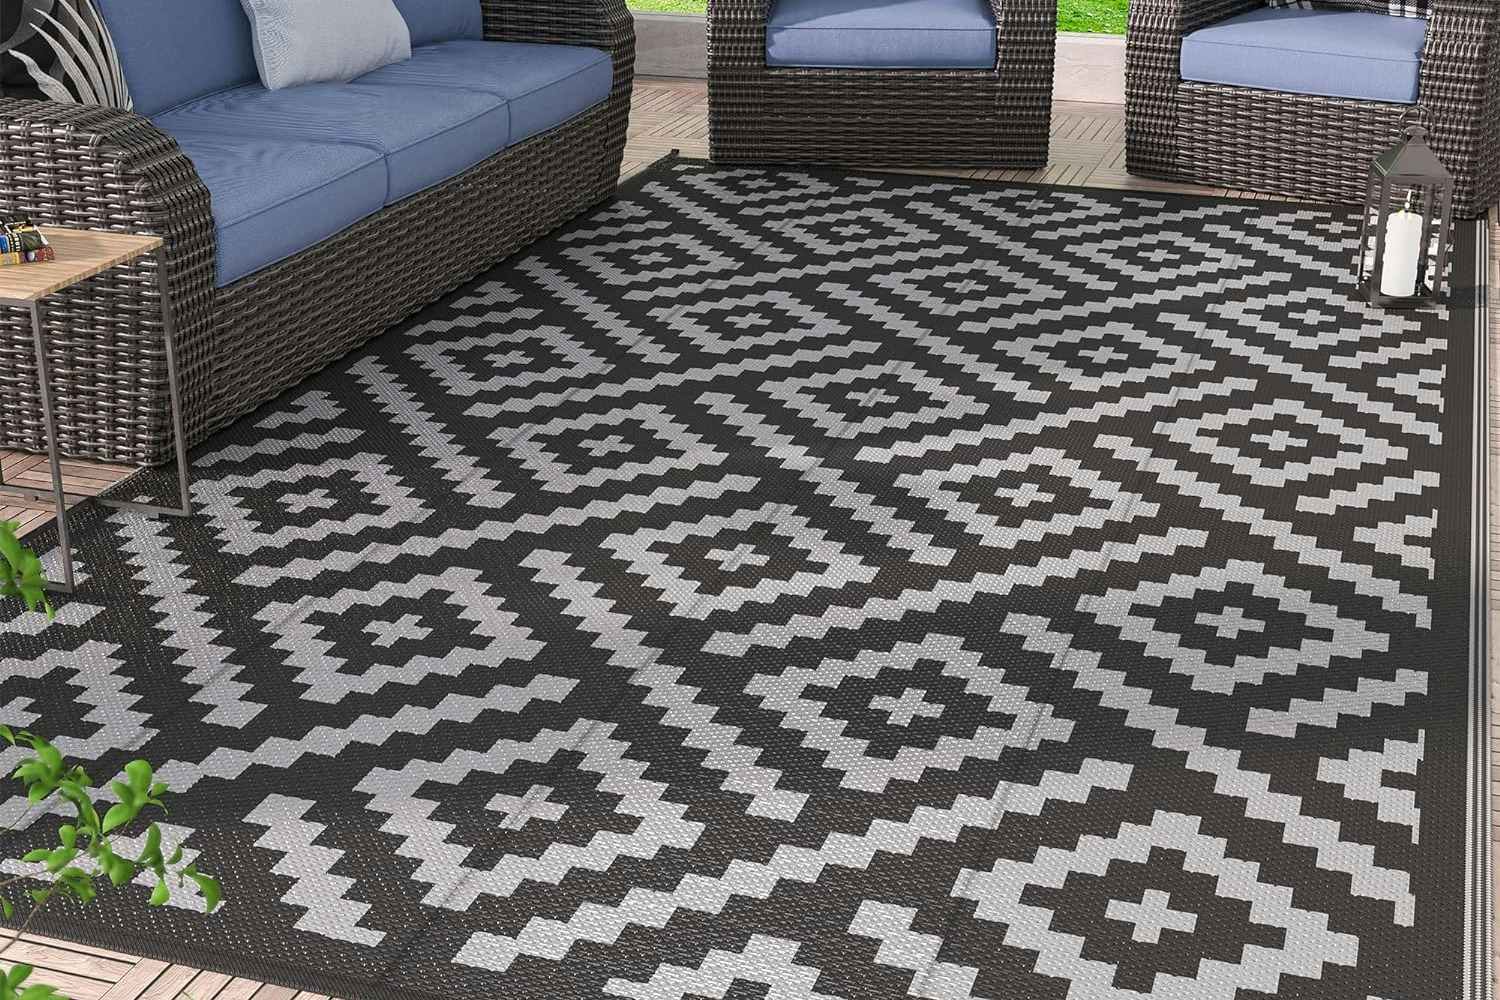 5' x 8' Outdoor Patio Rugs, as Low as $19.99 on Amazon